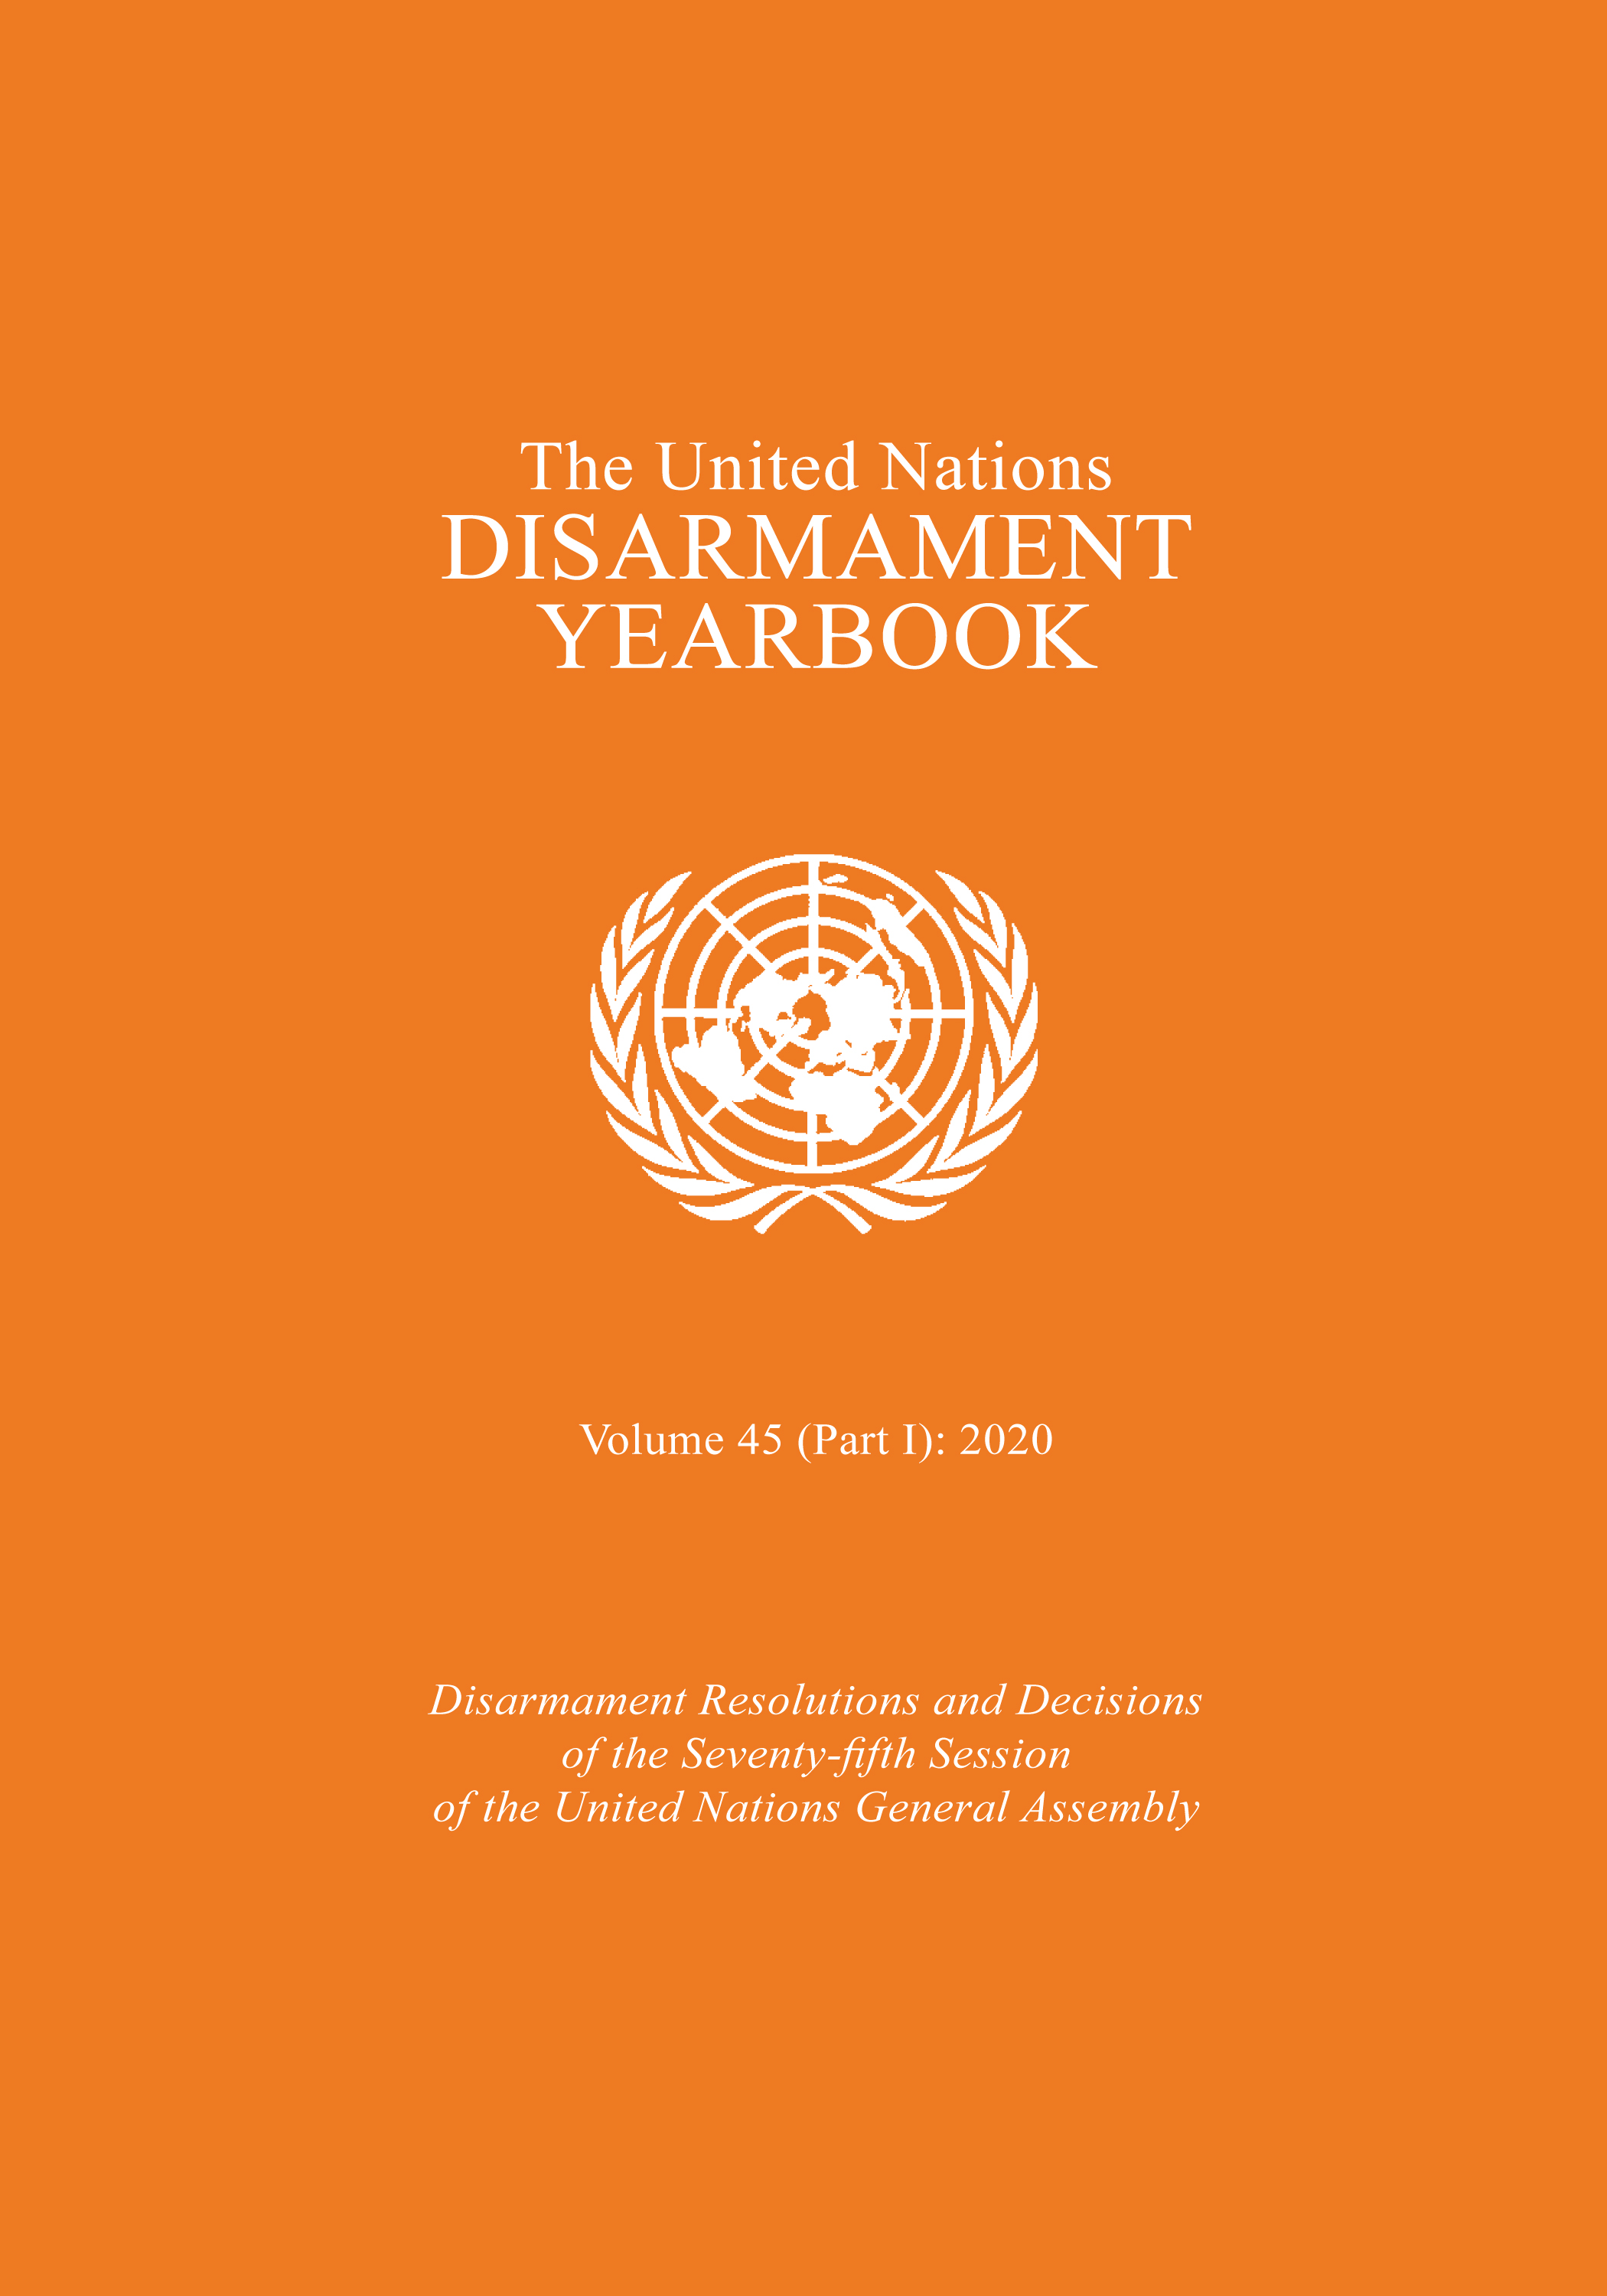 image of 75/74 United Nations disarmament fellowship, training and advisory services